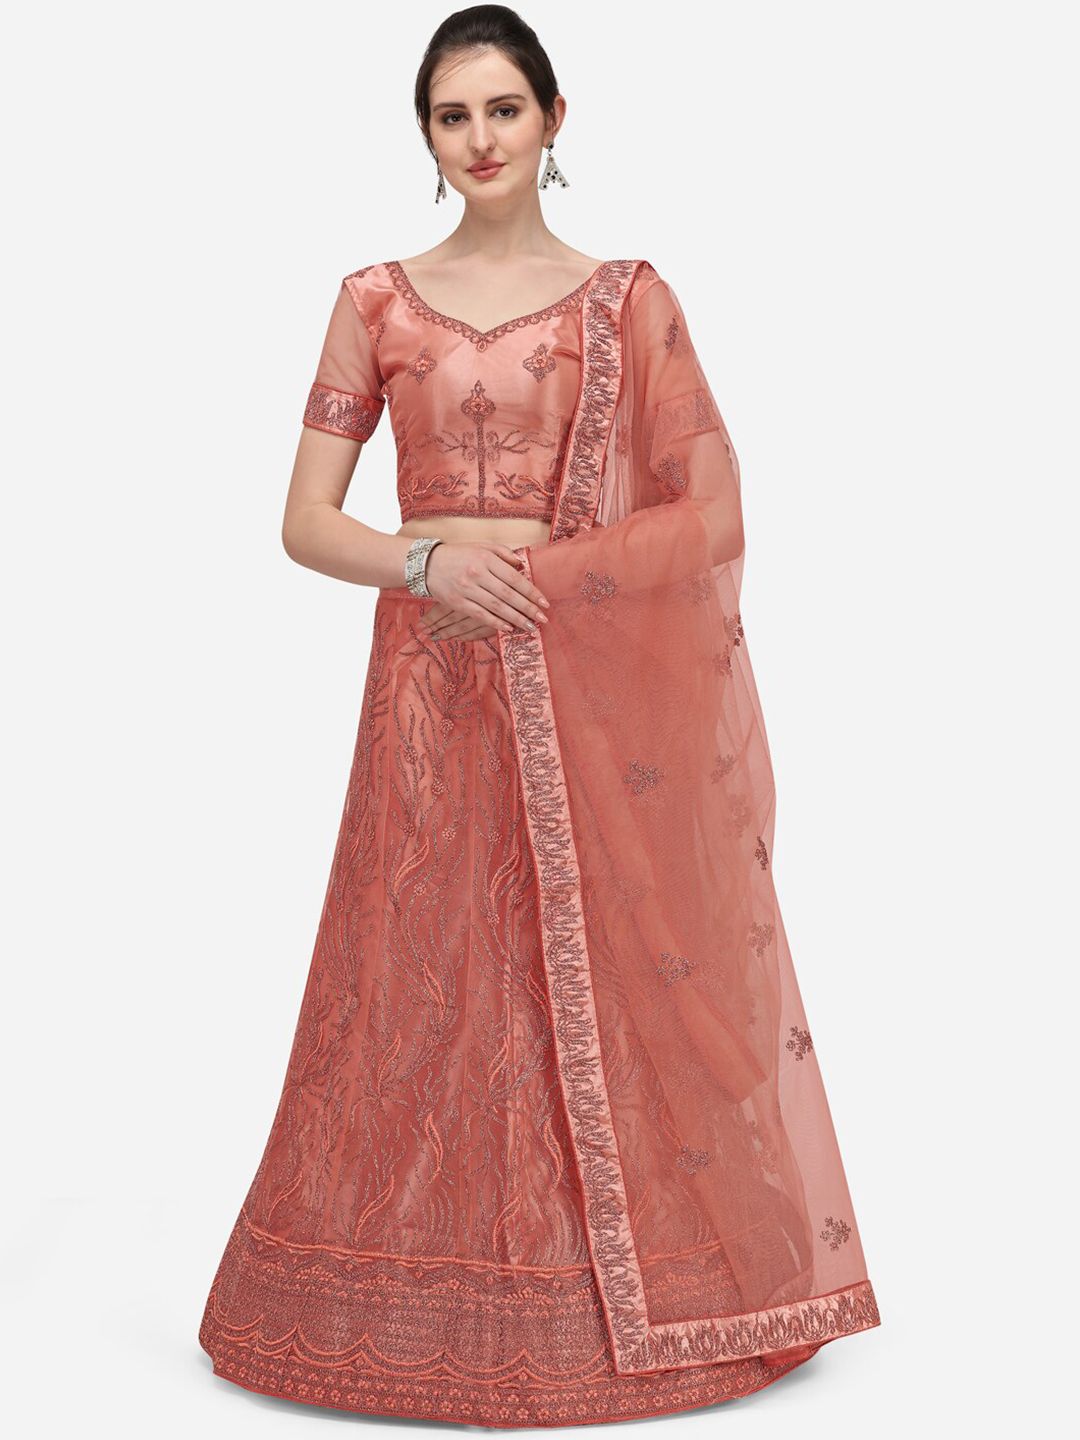 Netram Peach-Coloured Embroidered Beads and Stones Semi-Stitched Lehenga & Unstitched Blouse With Dupatta Price in India